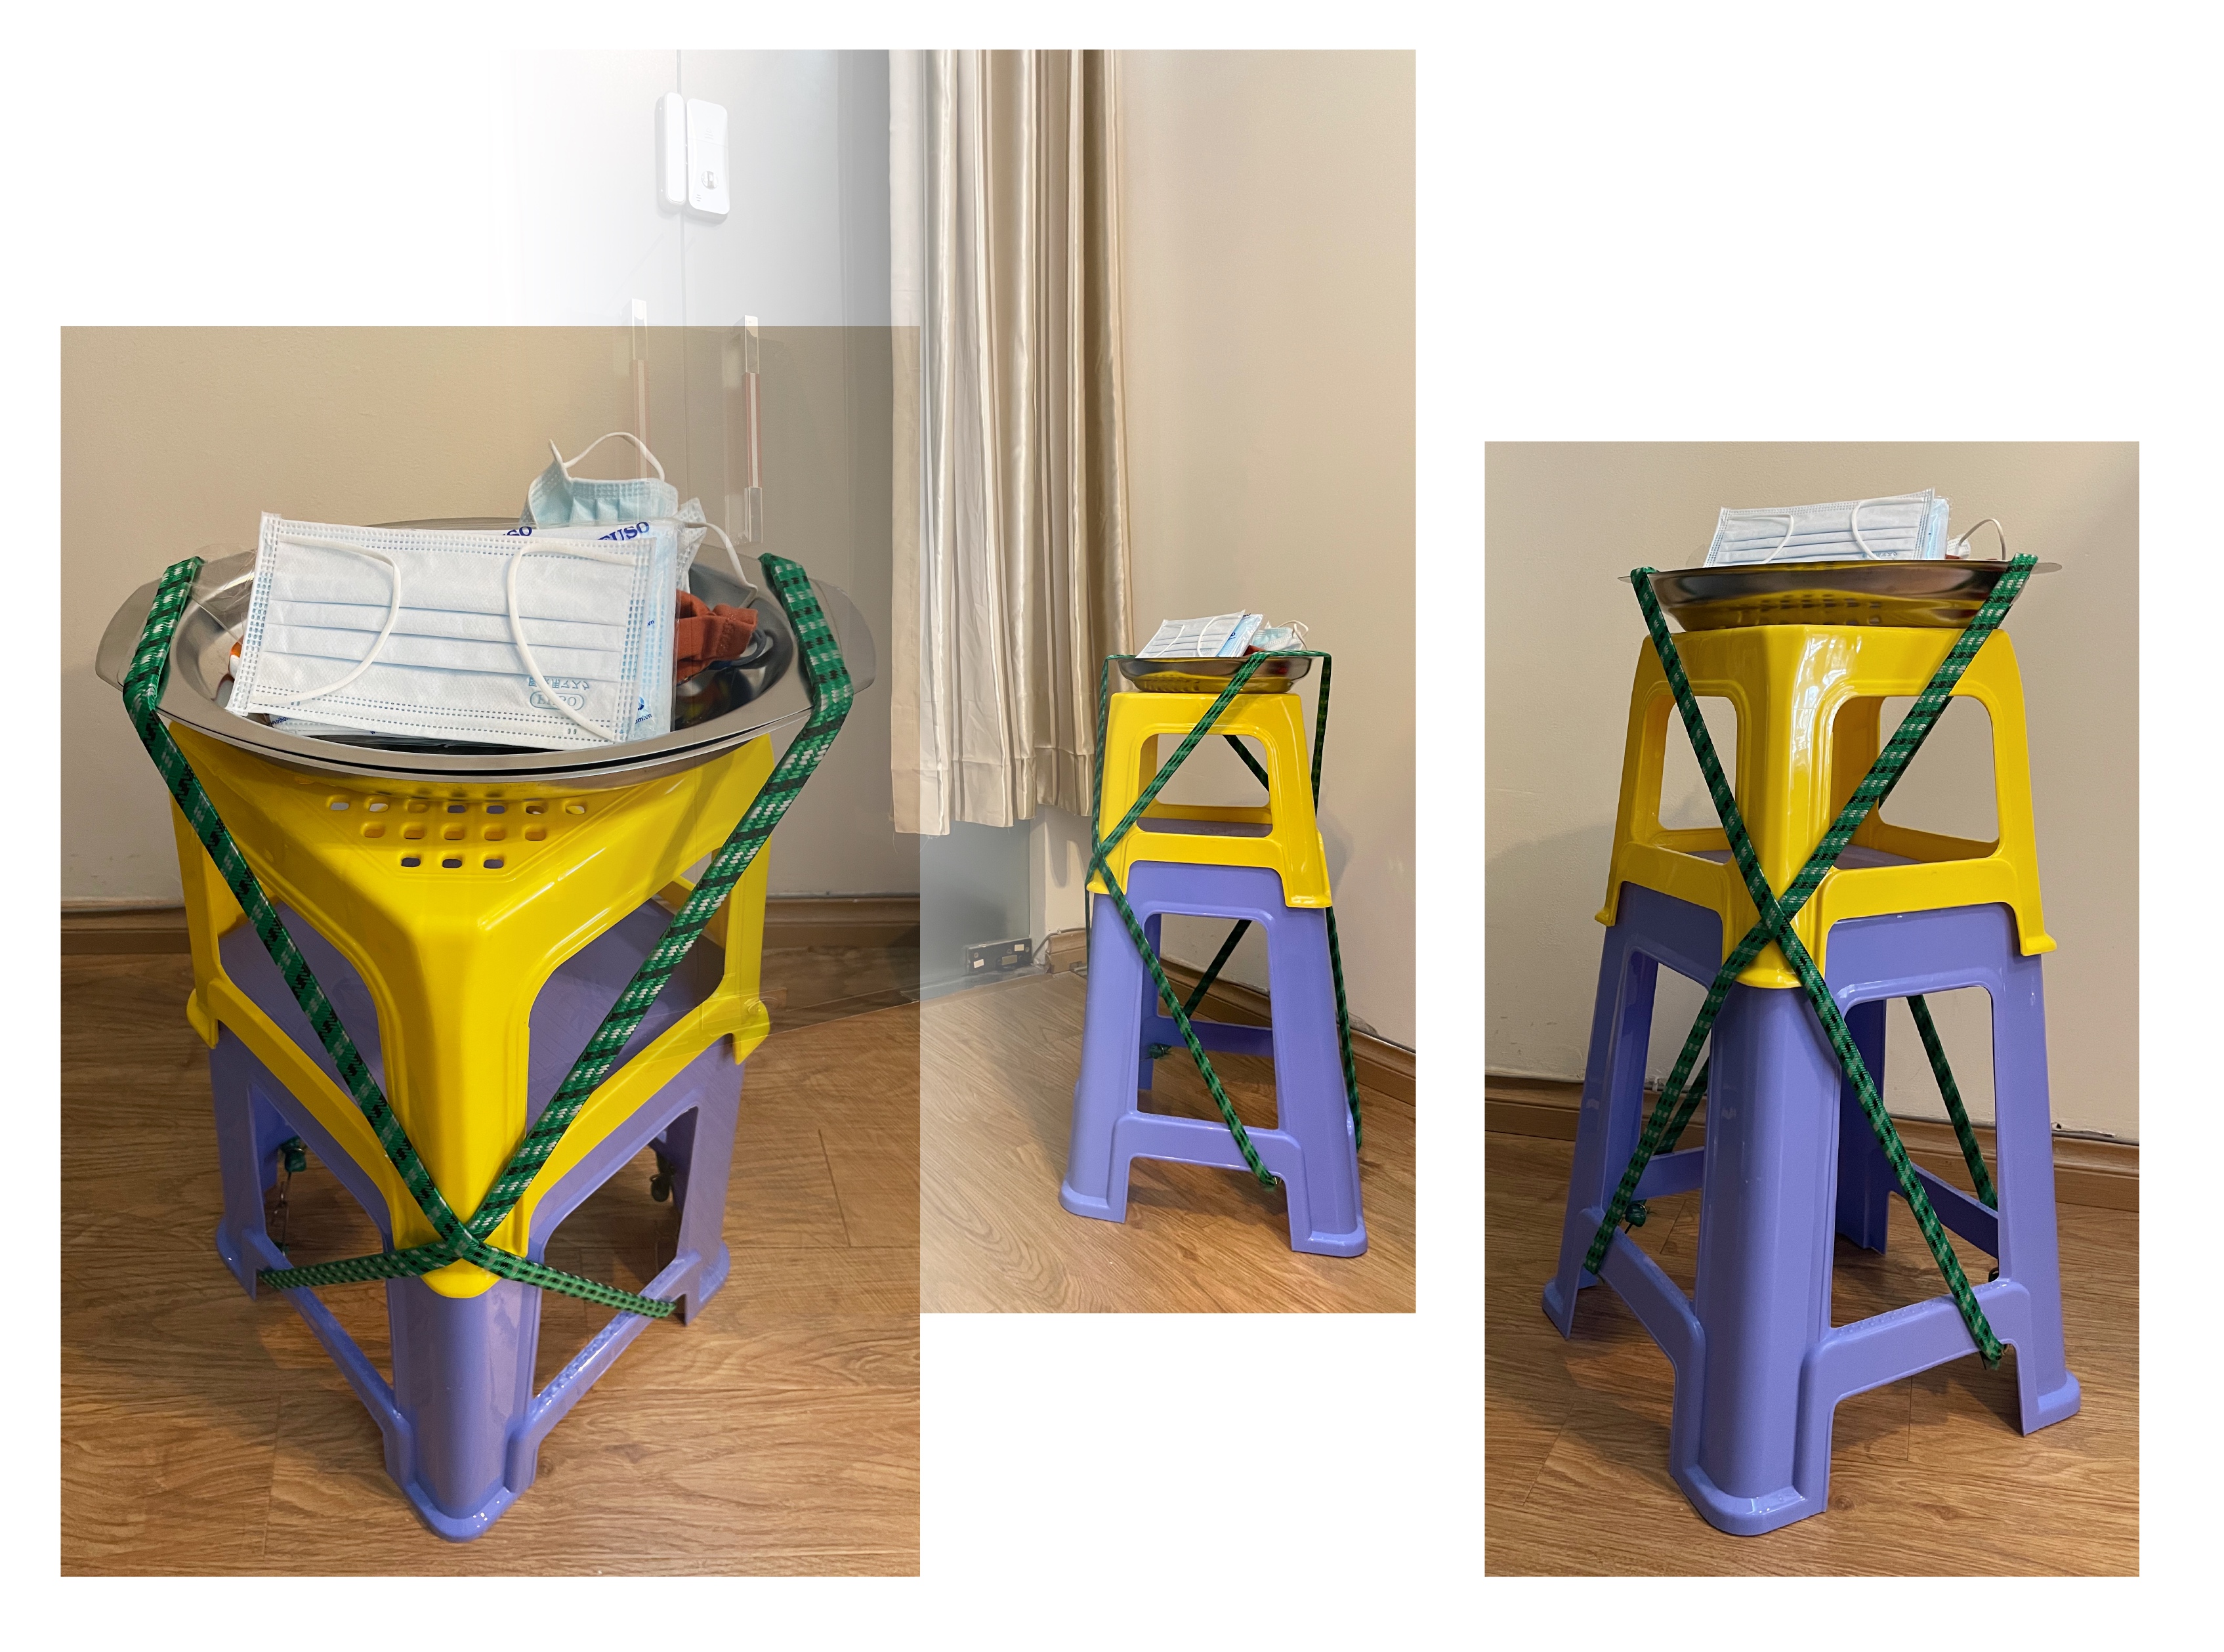 A pedastal-like structure. A blue stool of medium height is the base. A shorter yellow stool stands on it. A metal tray holding face masks is placed on top. The components are secured by two diagonally-placed green bungee cords. The structure is located near a door. The room is brown.